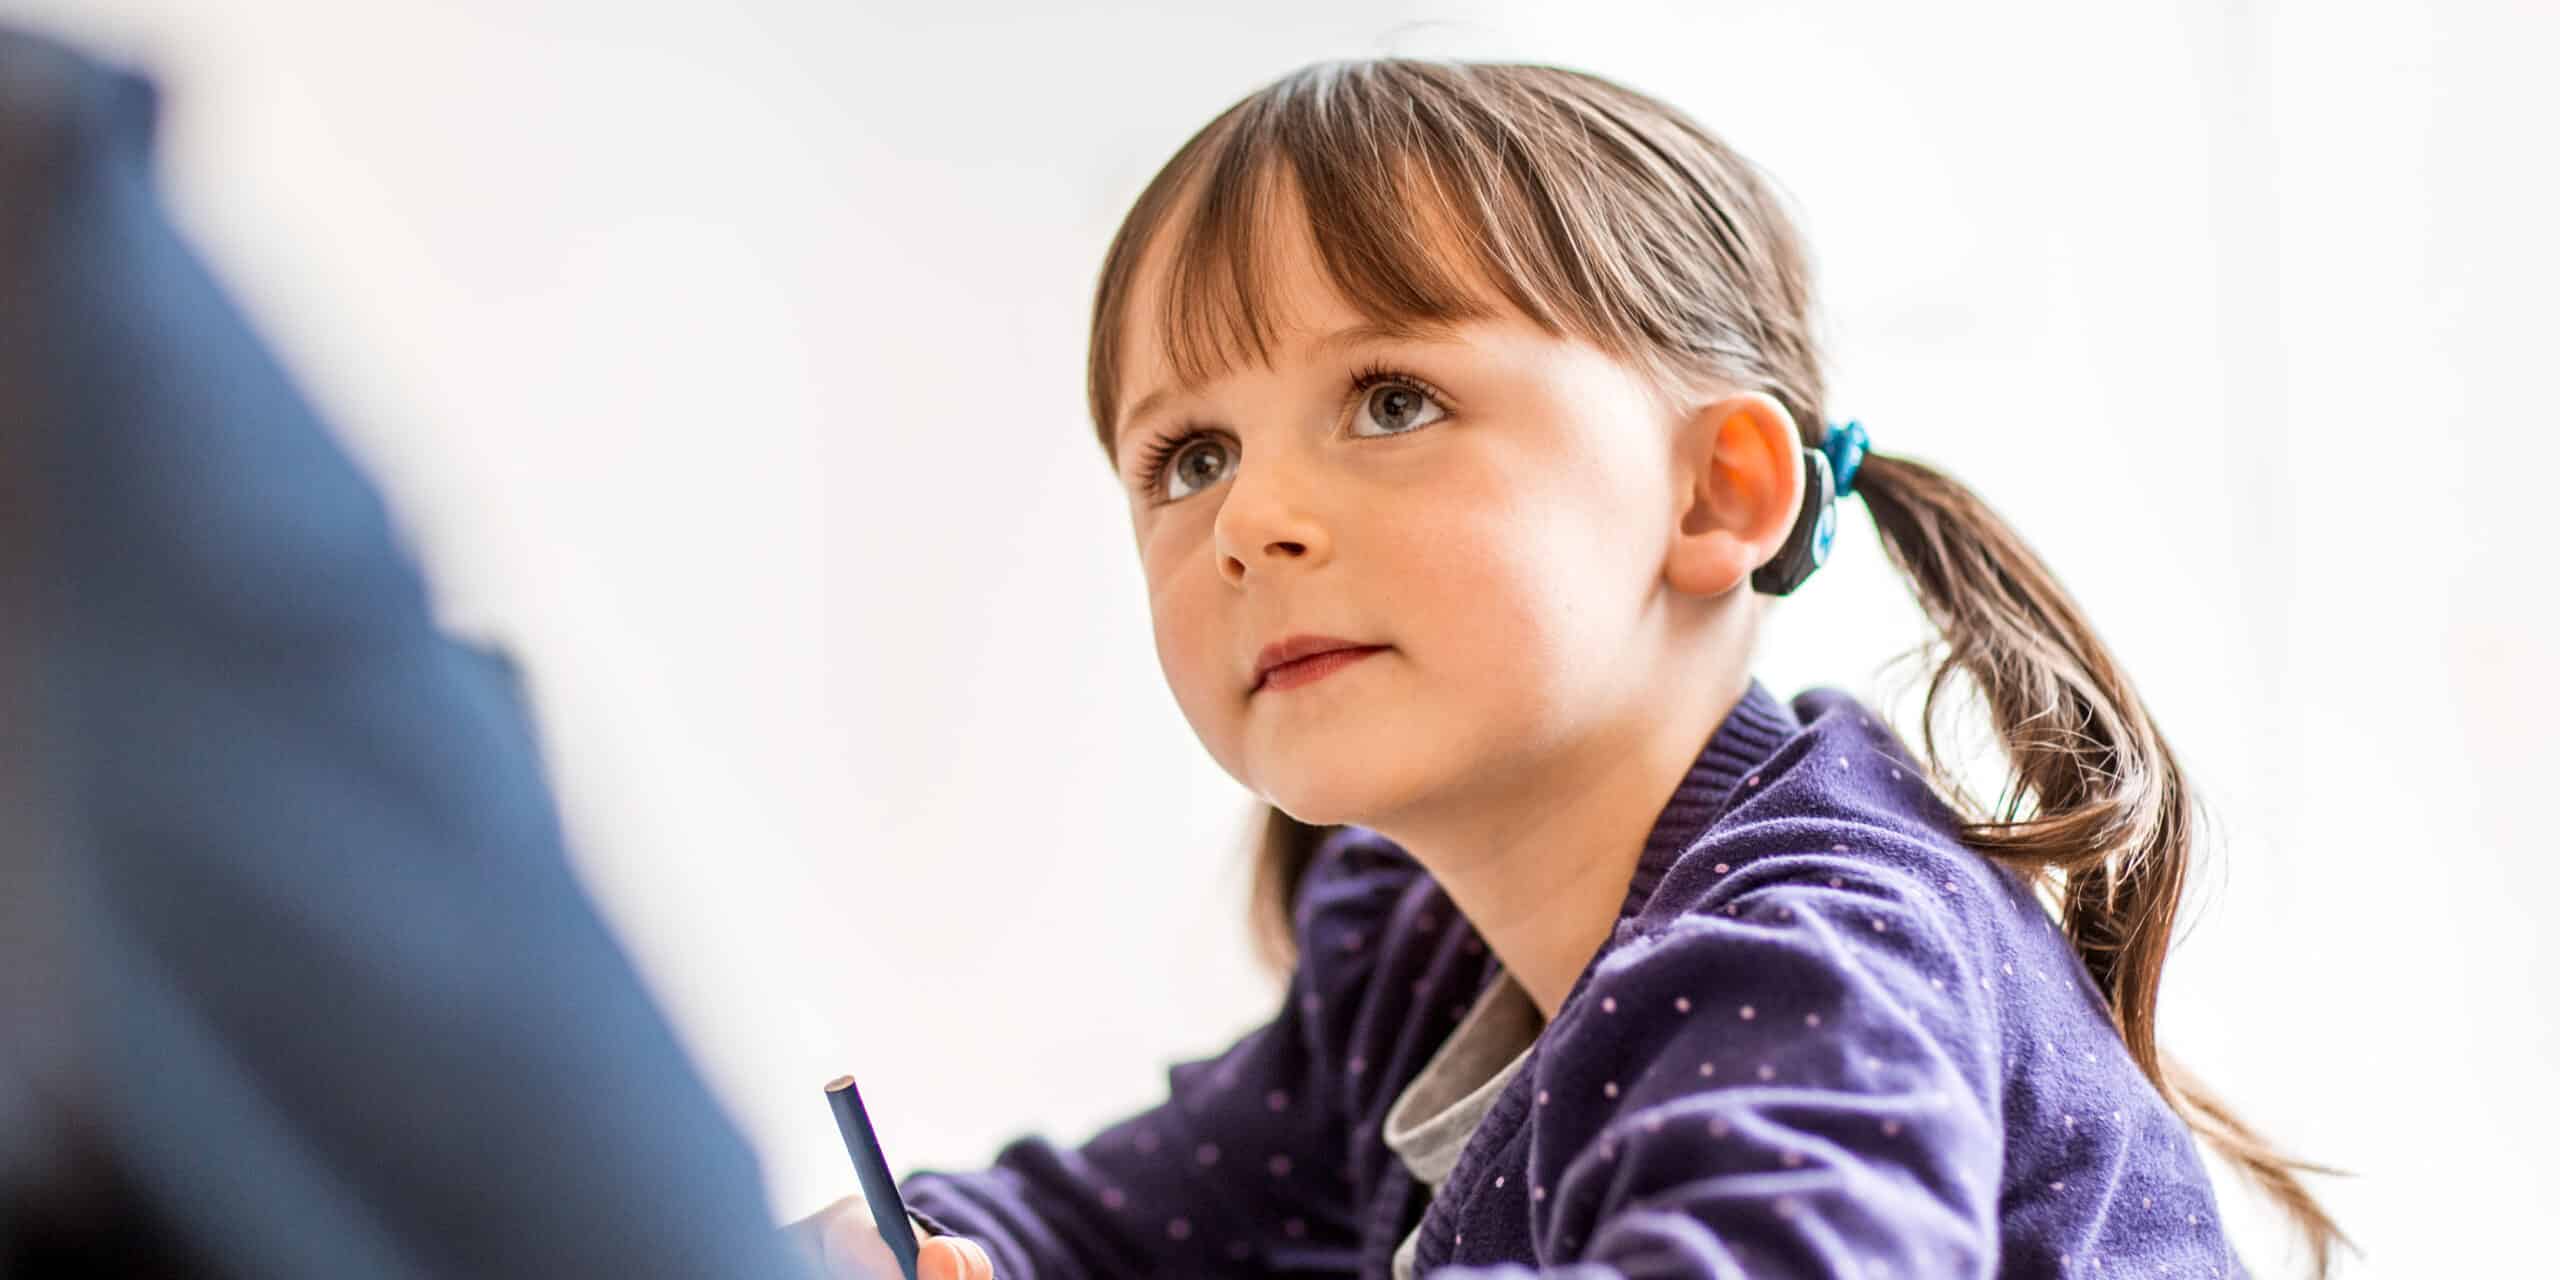 Speech therapy and rehabilitation support is important for children using bone conduction devices.